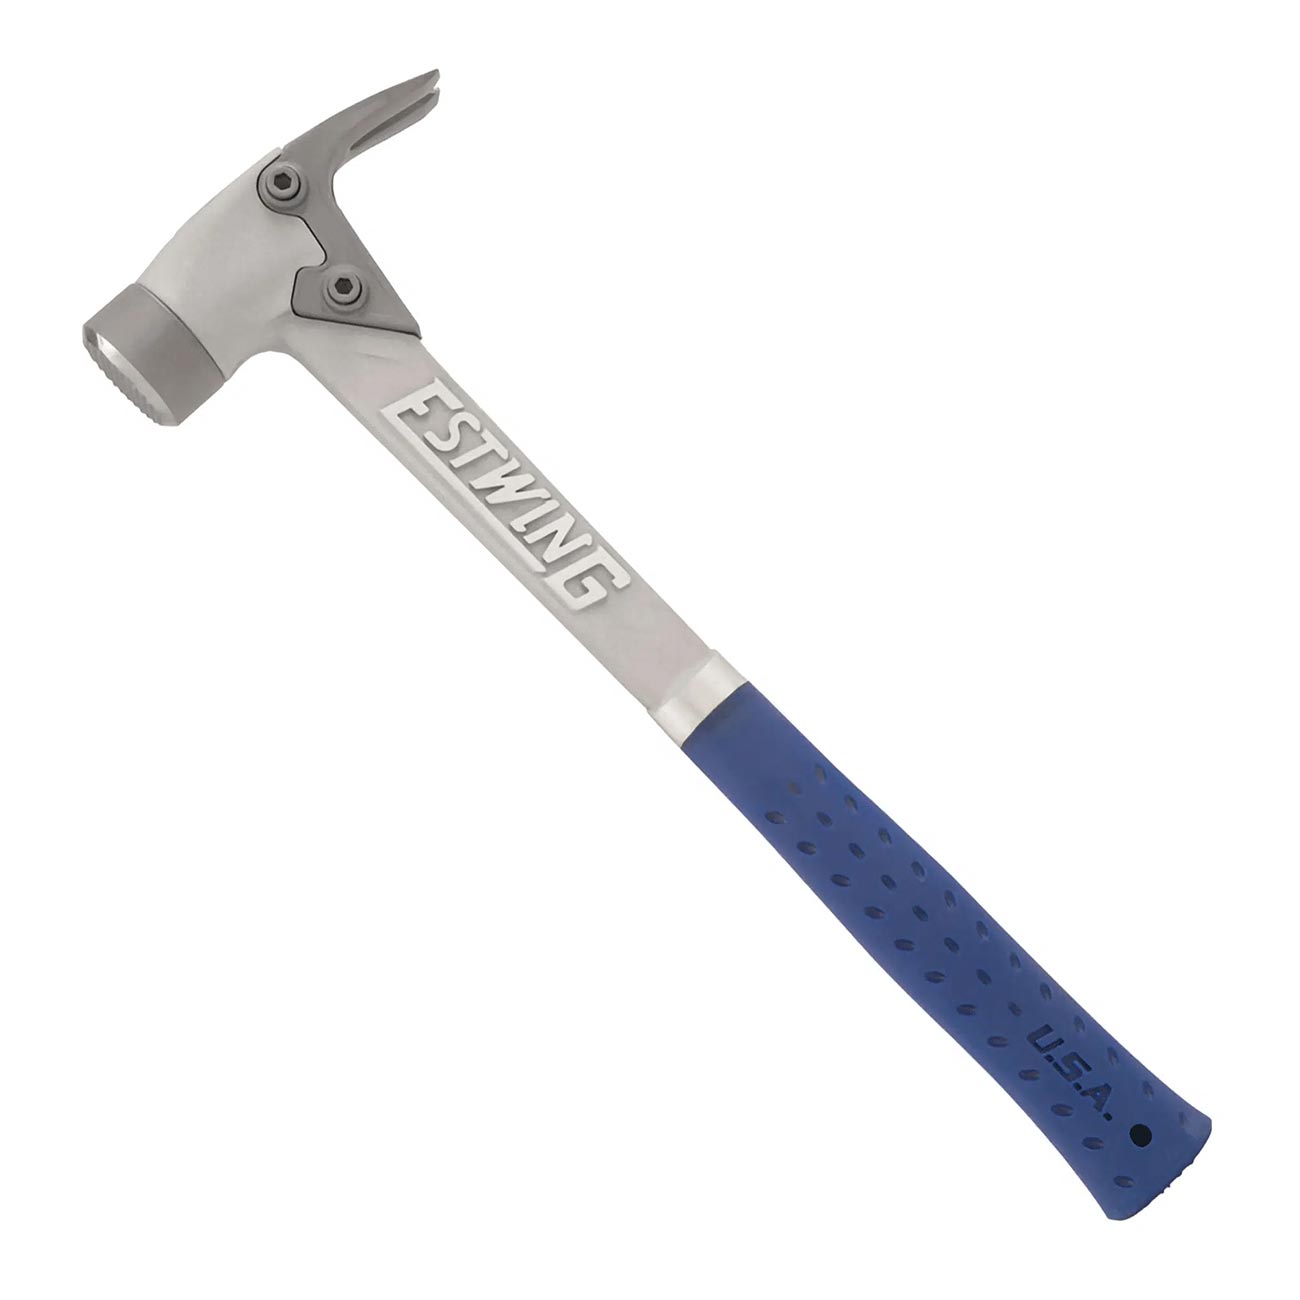 Estwing 14oz. Blue Vinyl Grip Aluminum Hammer with Milled Face